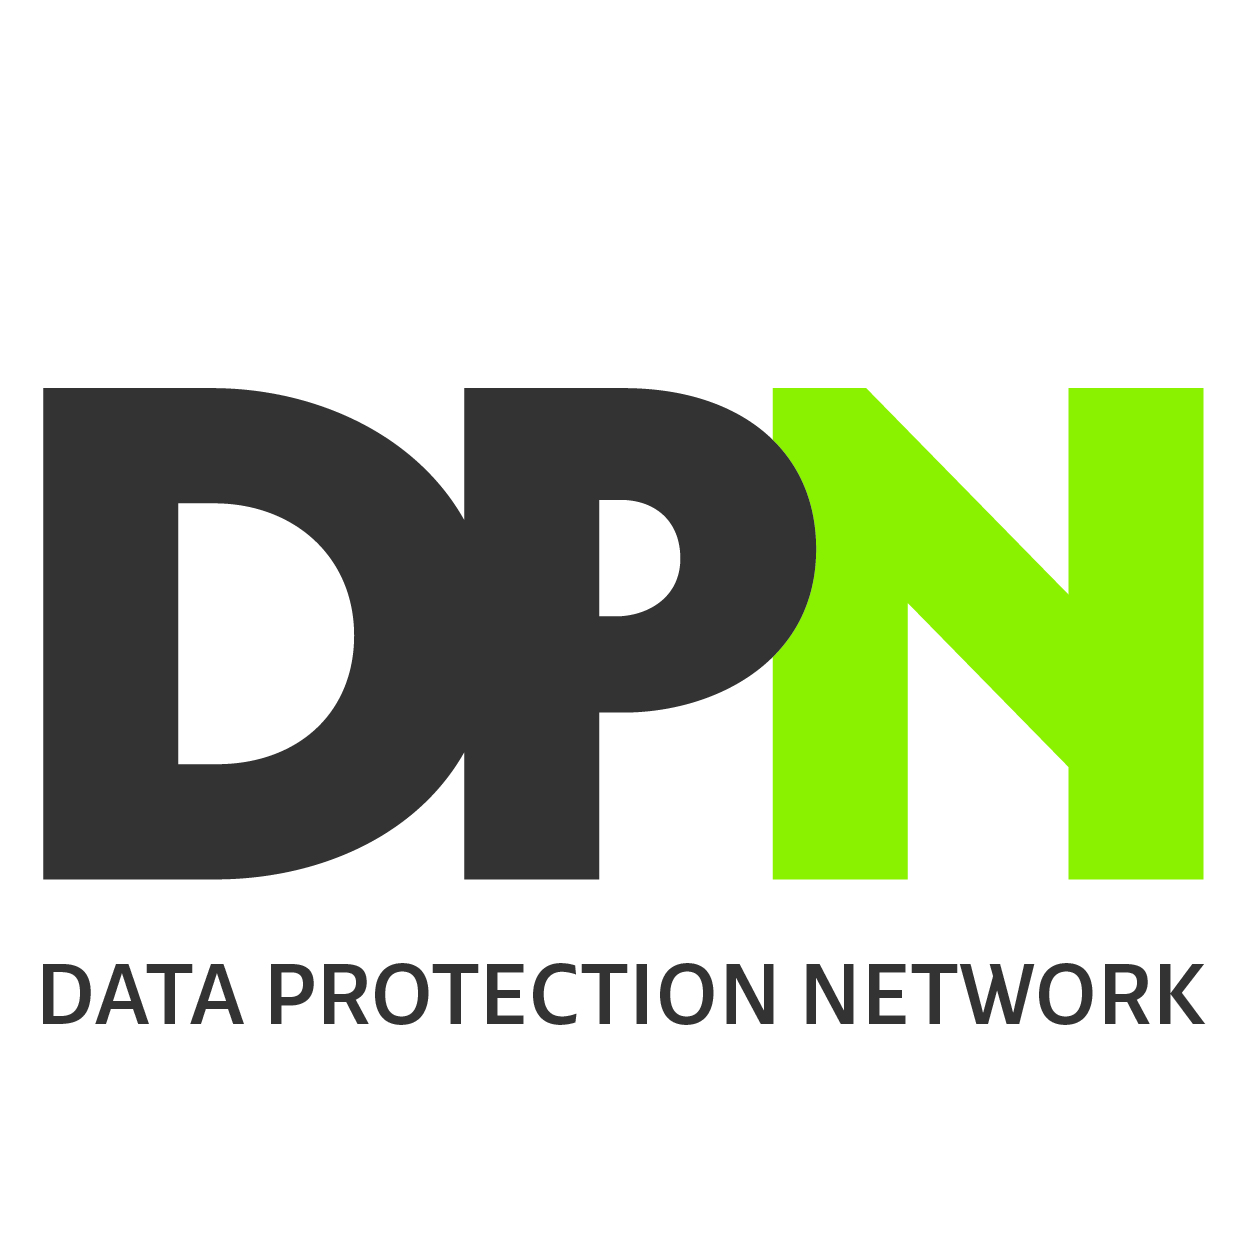 Data Protection Network